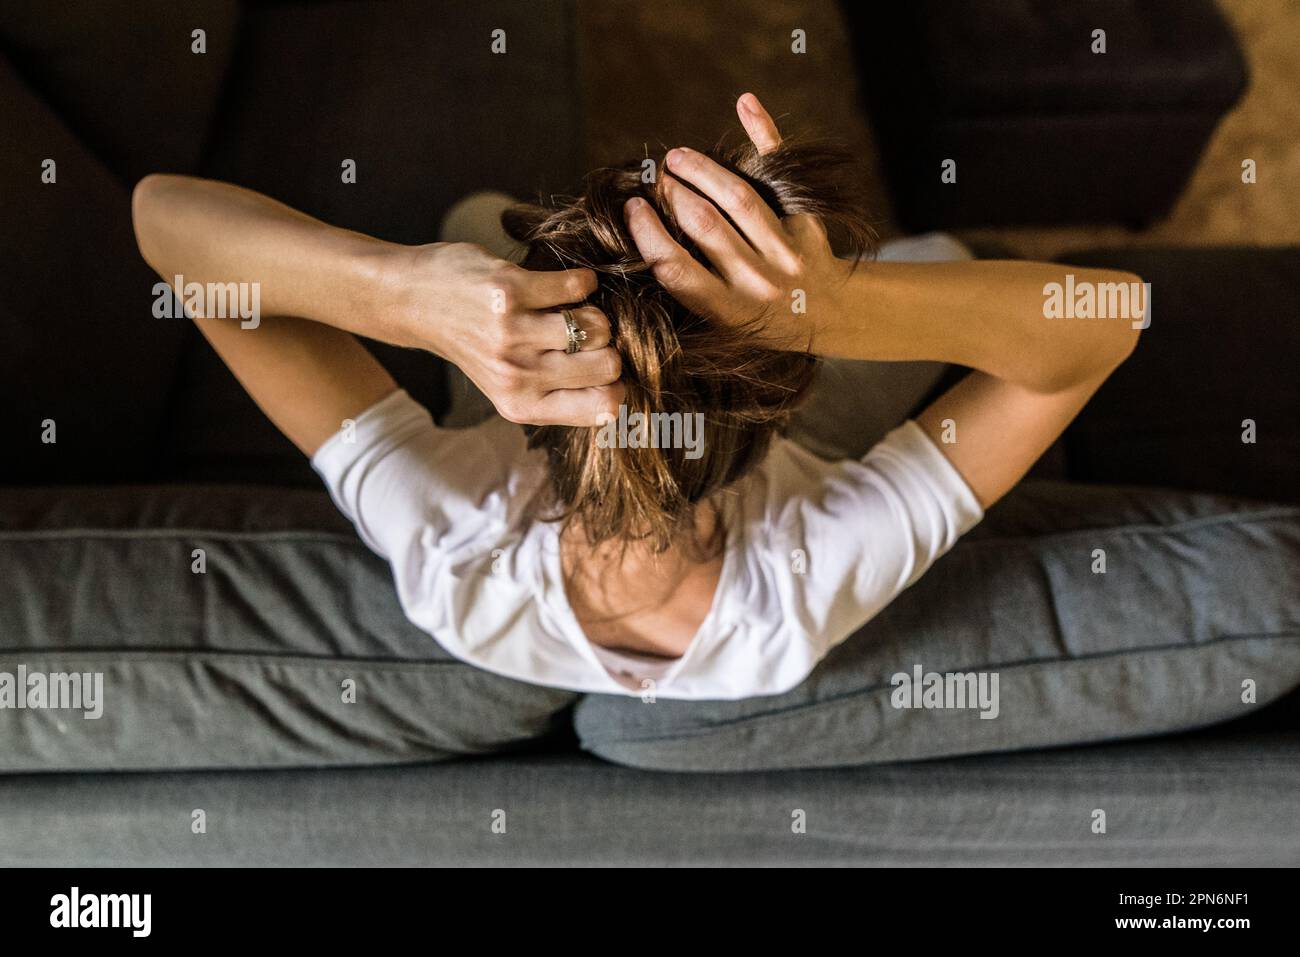 Young woman sitting on couch putting hair up from above Stock Photo